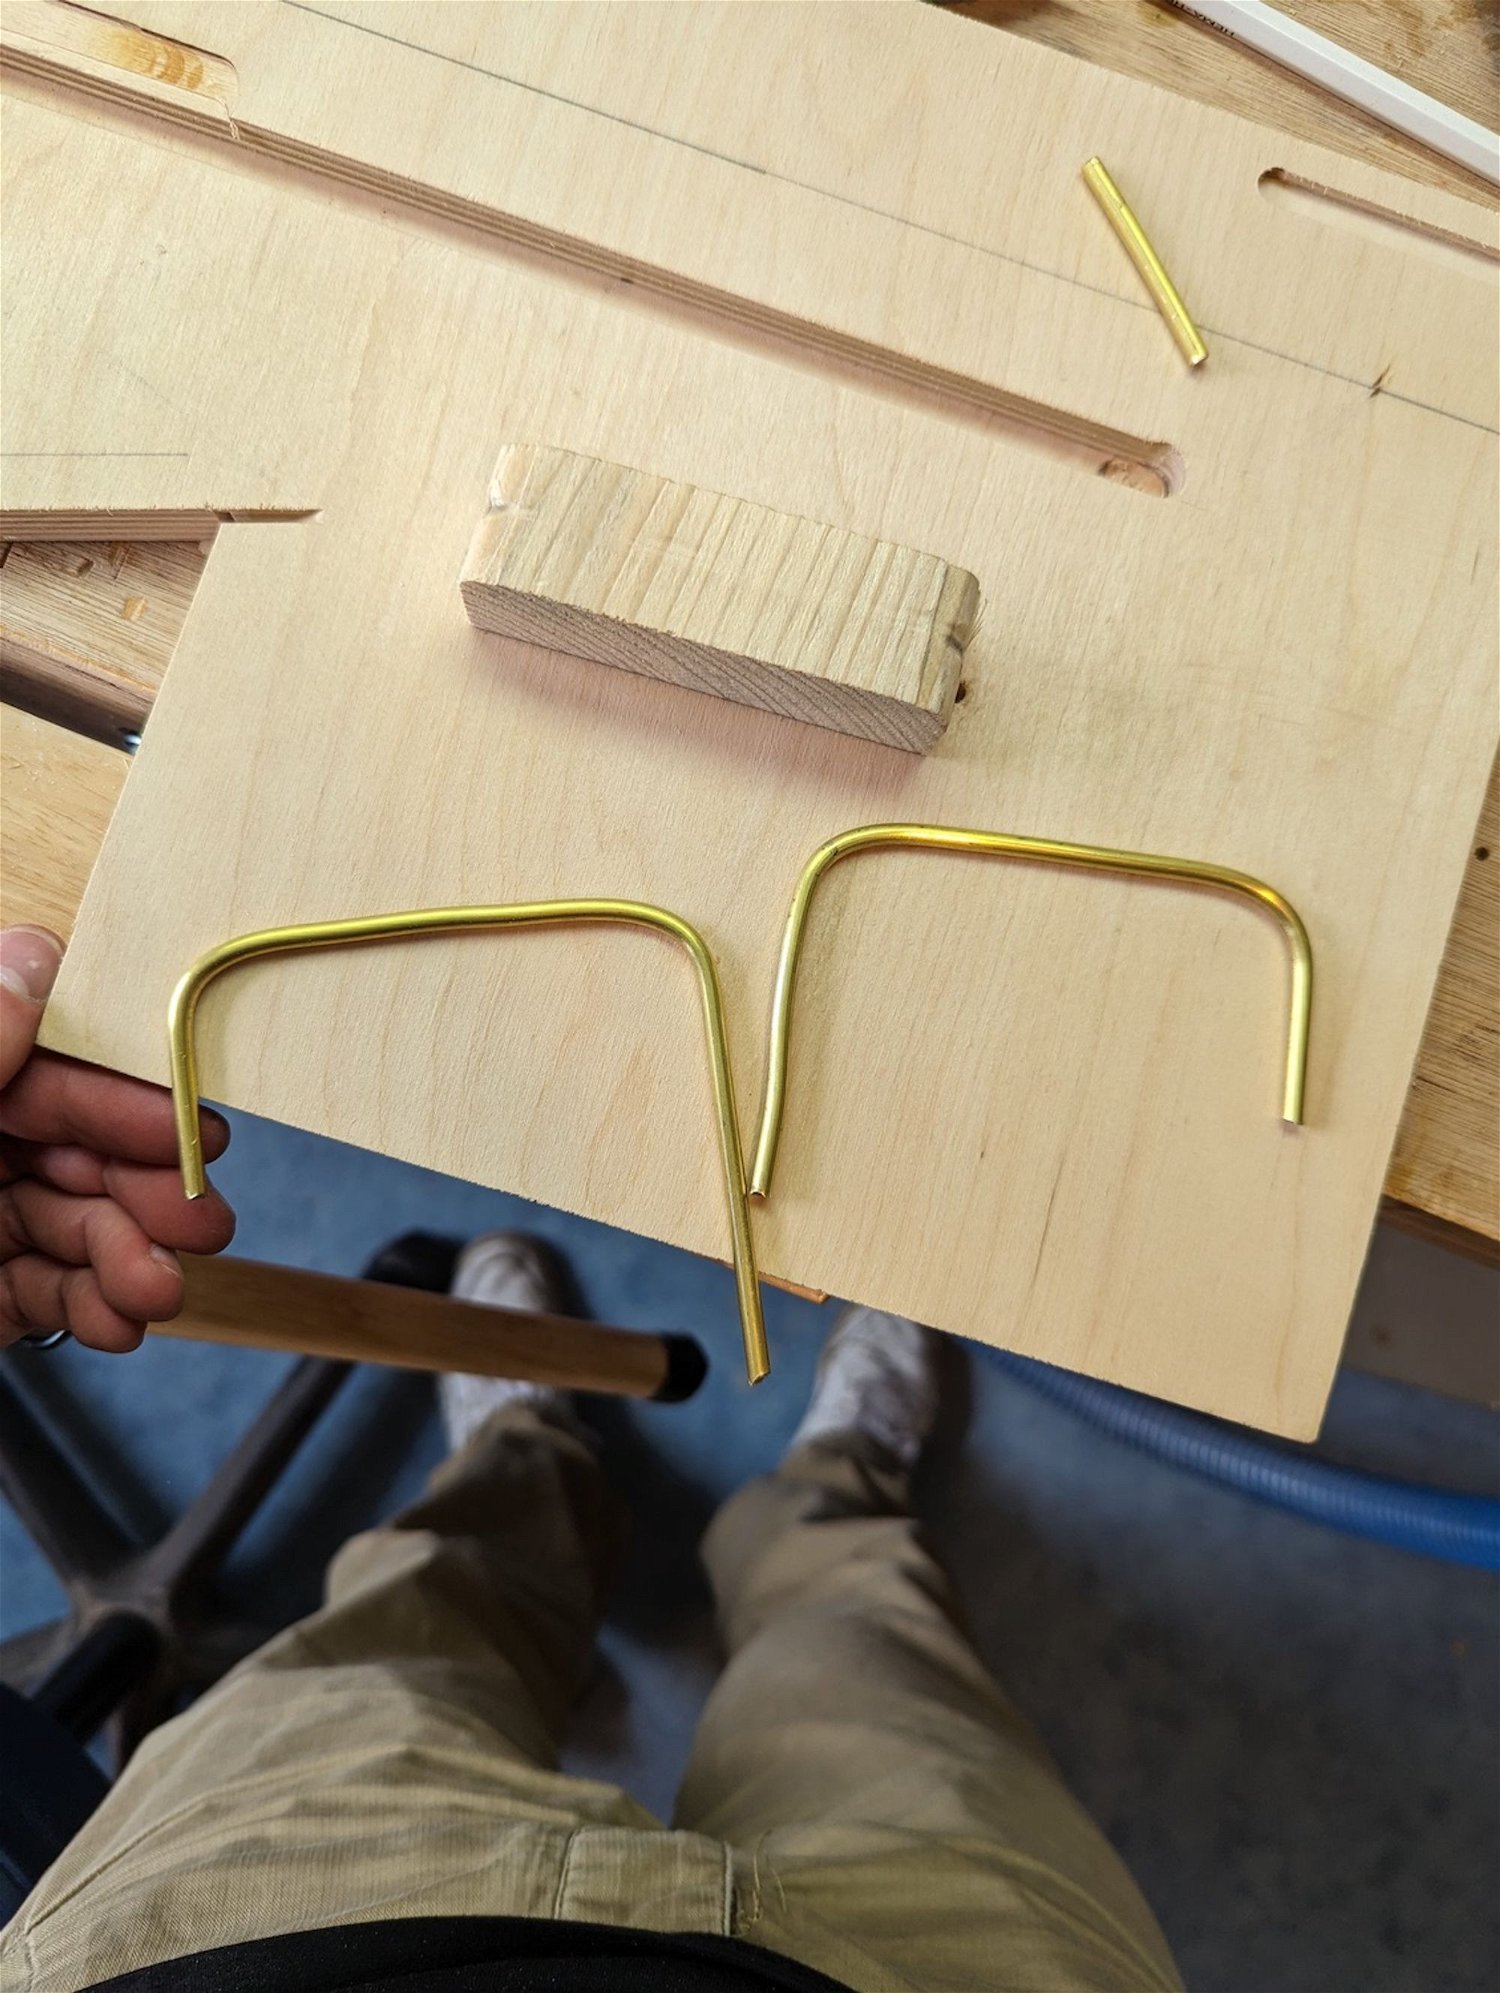 I tried my hand at bending some brass bar manually using a wooden block. It’s very far from perfect, but was a good experiment. The block i used for bending was too soft so i wasn’t able to make the bends repeatable.